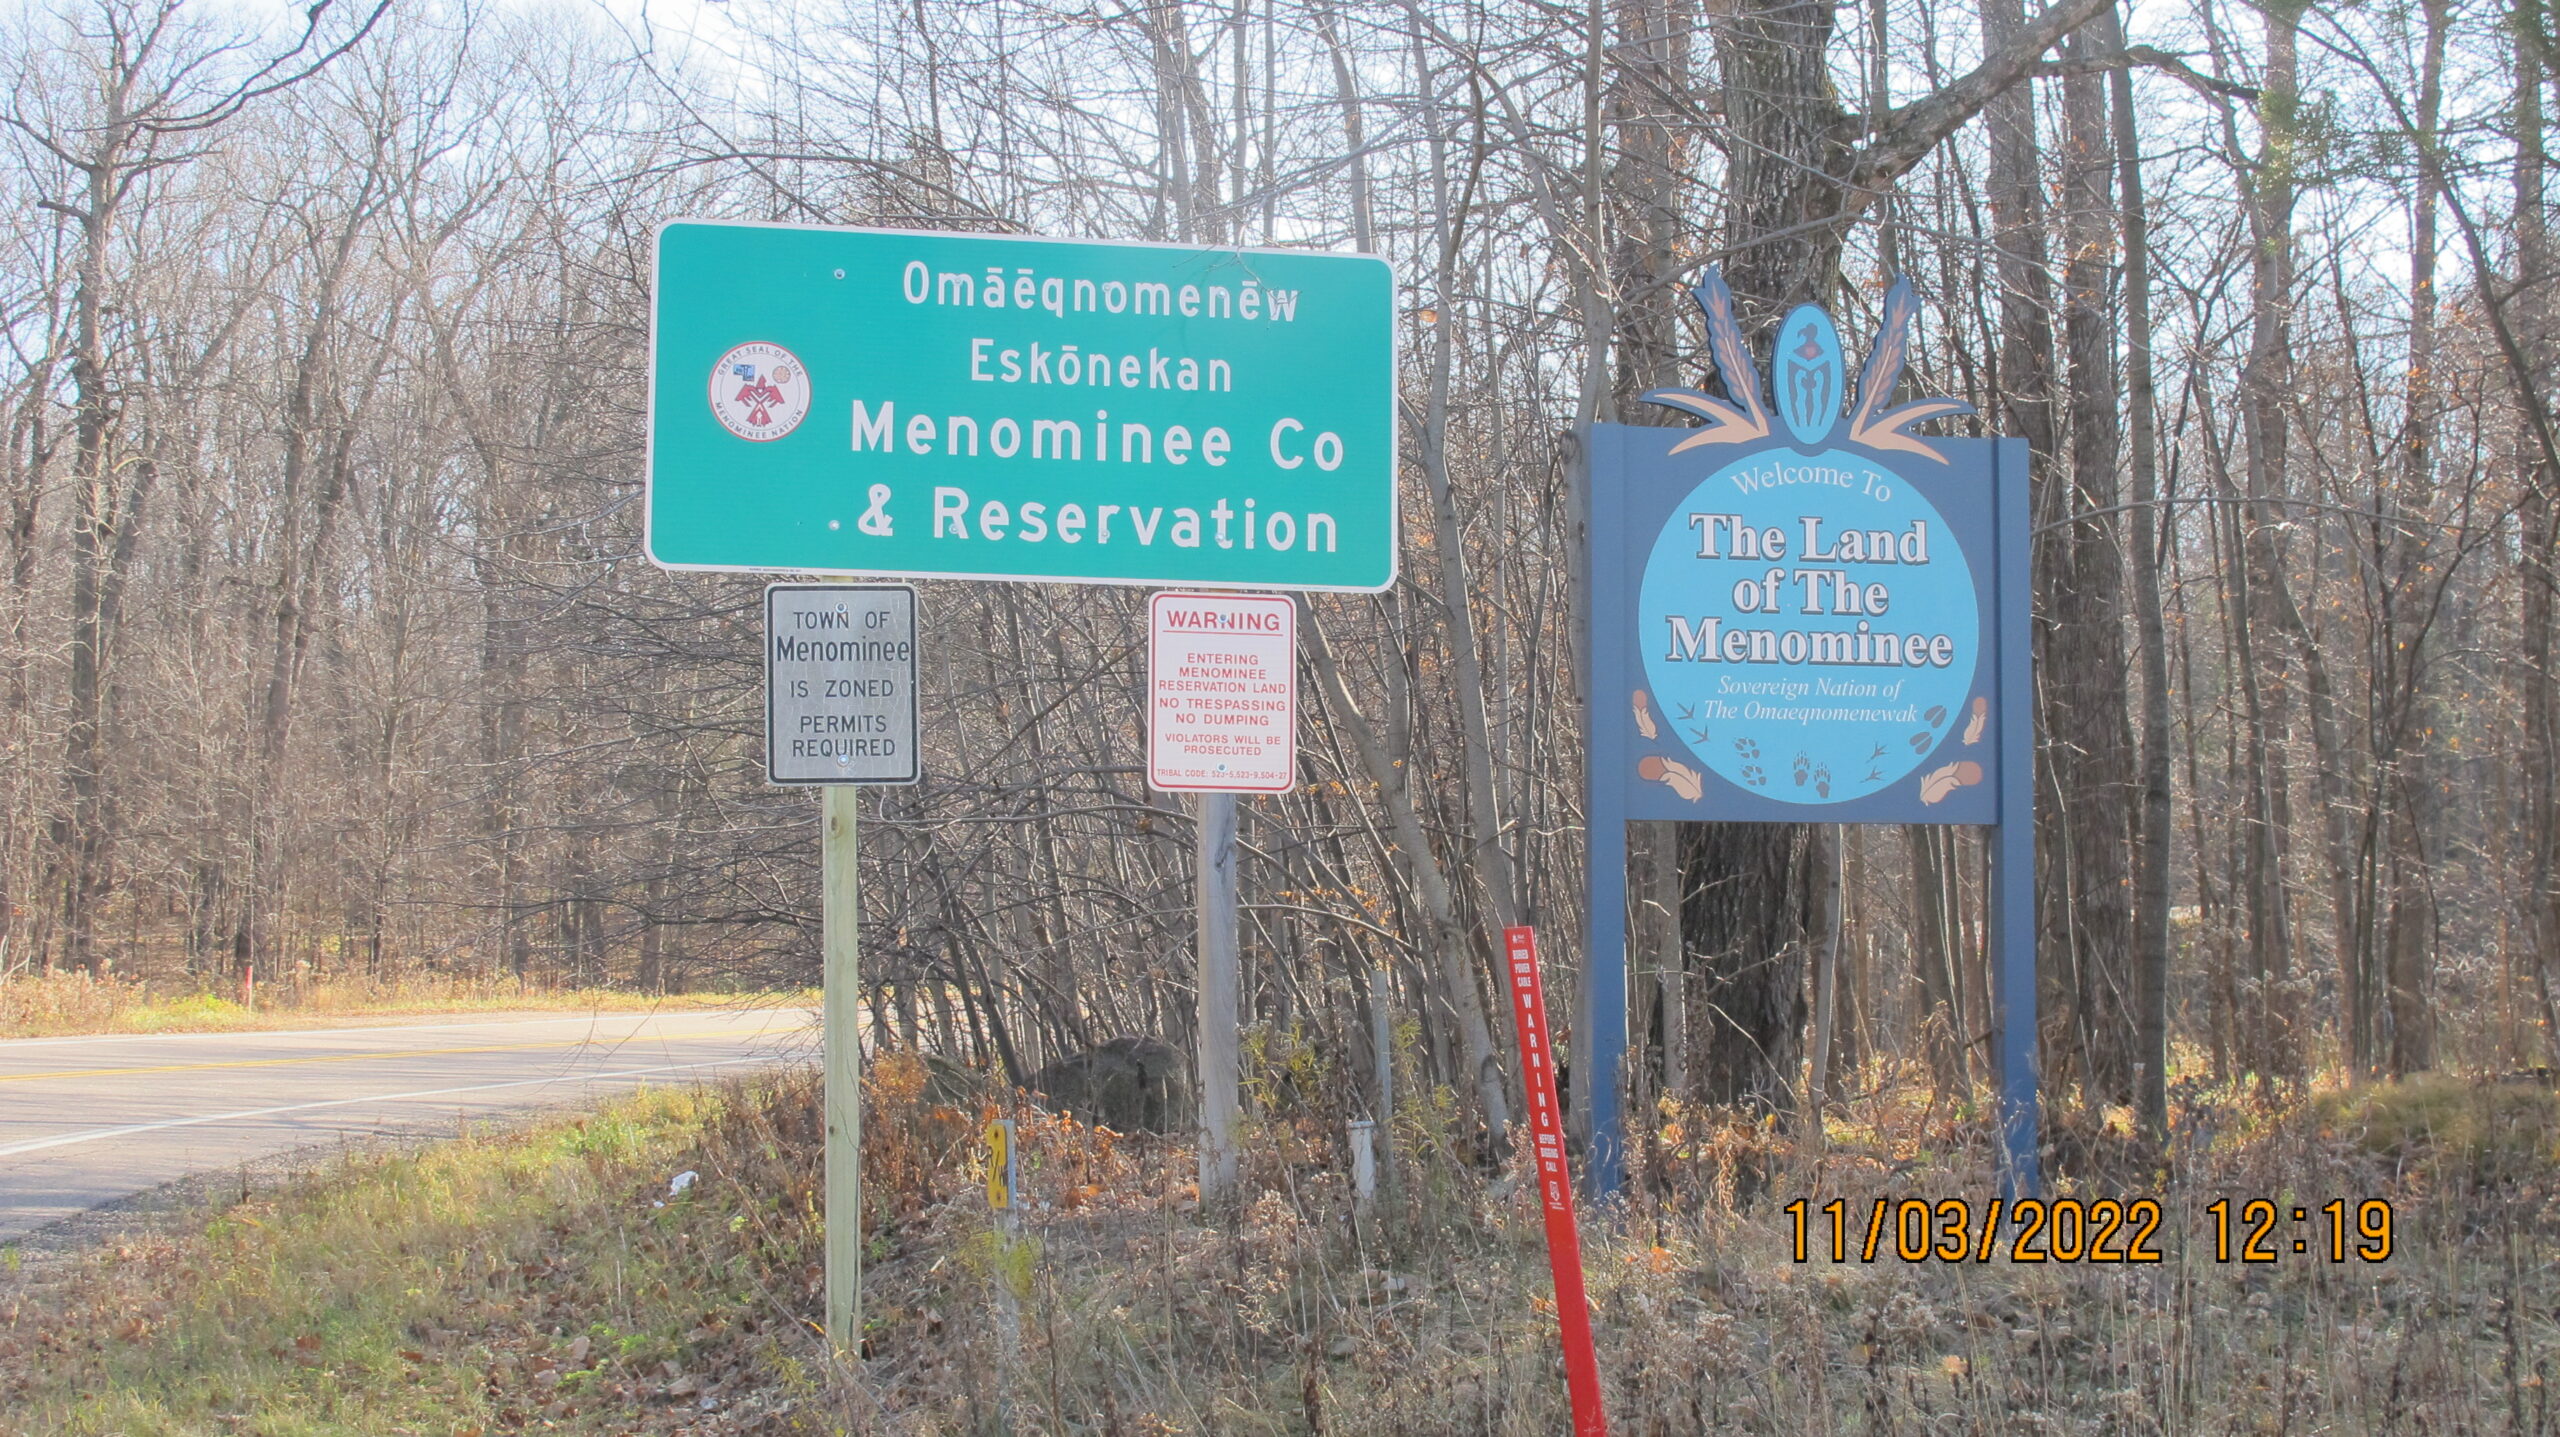 How dual-language highway signs will revive native languages ‘in crisis mode’